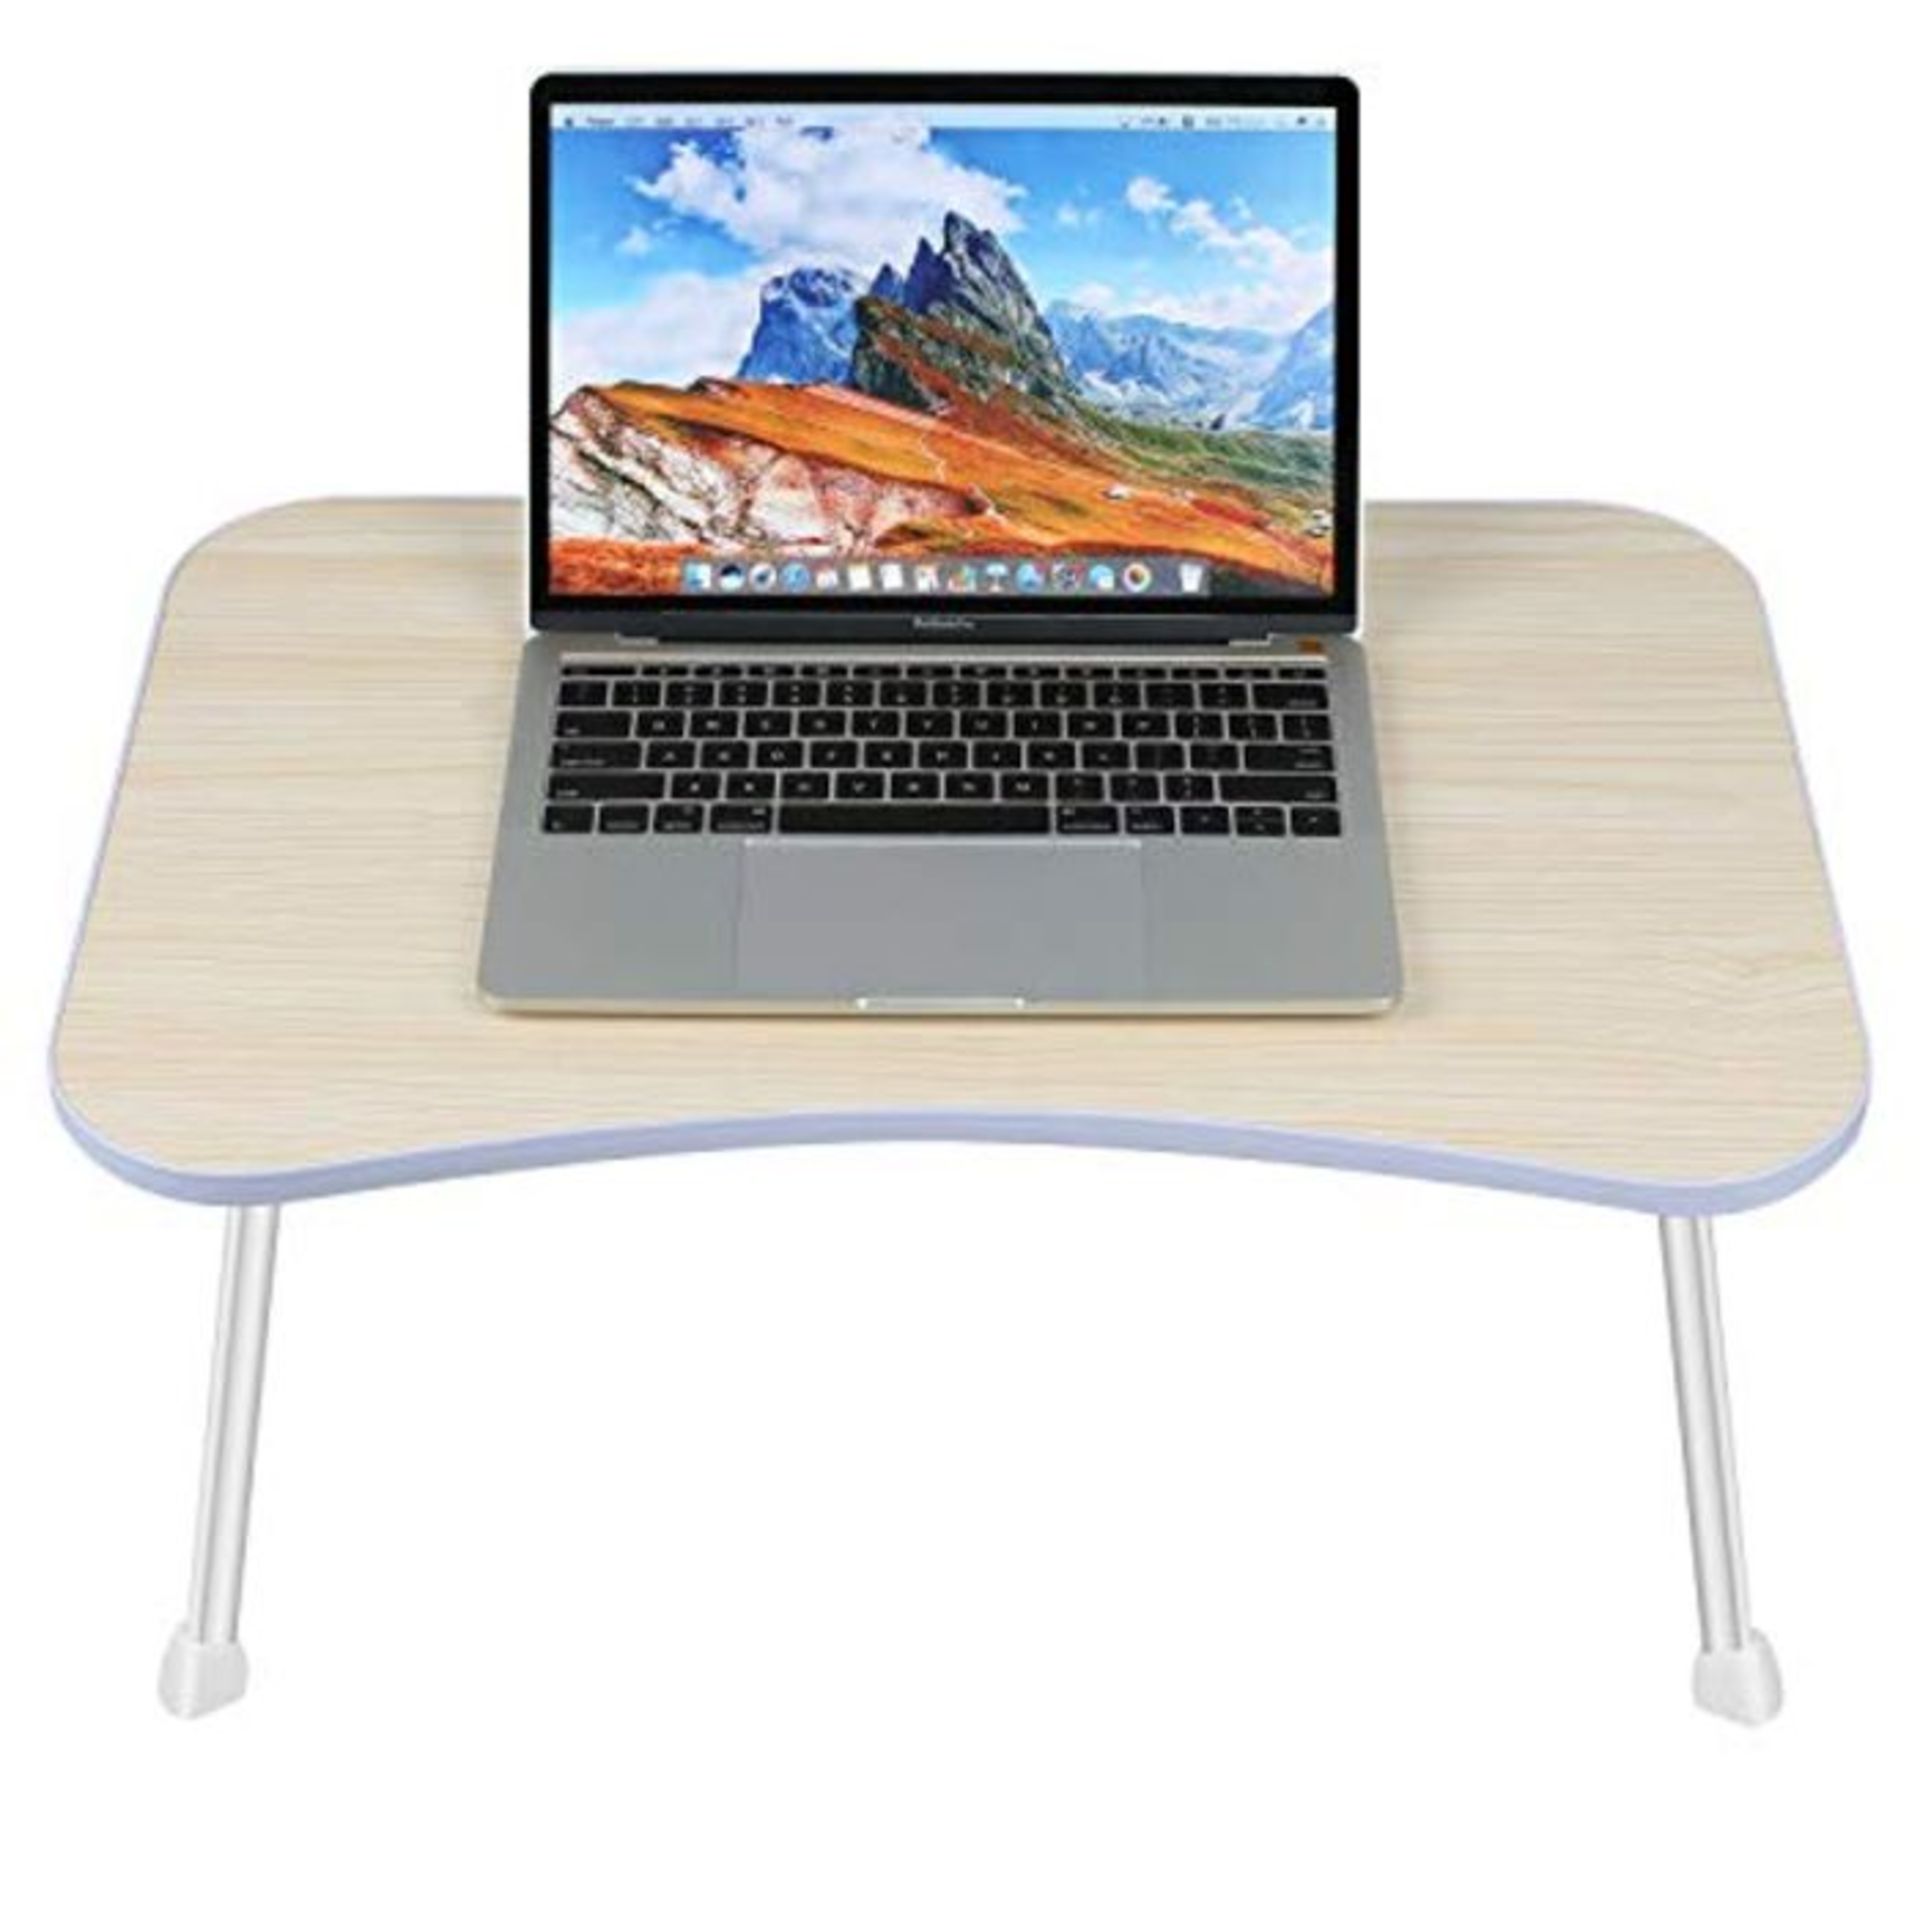 [CRACKED] Laptop Bed Table Breakfast Tray, Foldable Laptop Lap Standing Desk for Bed S